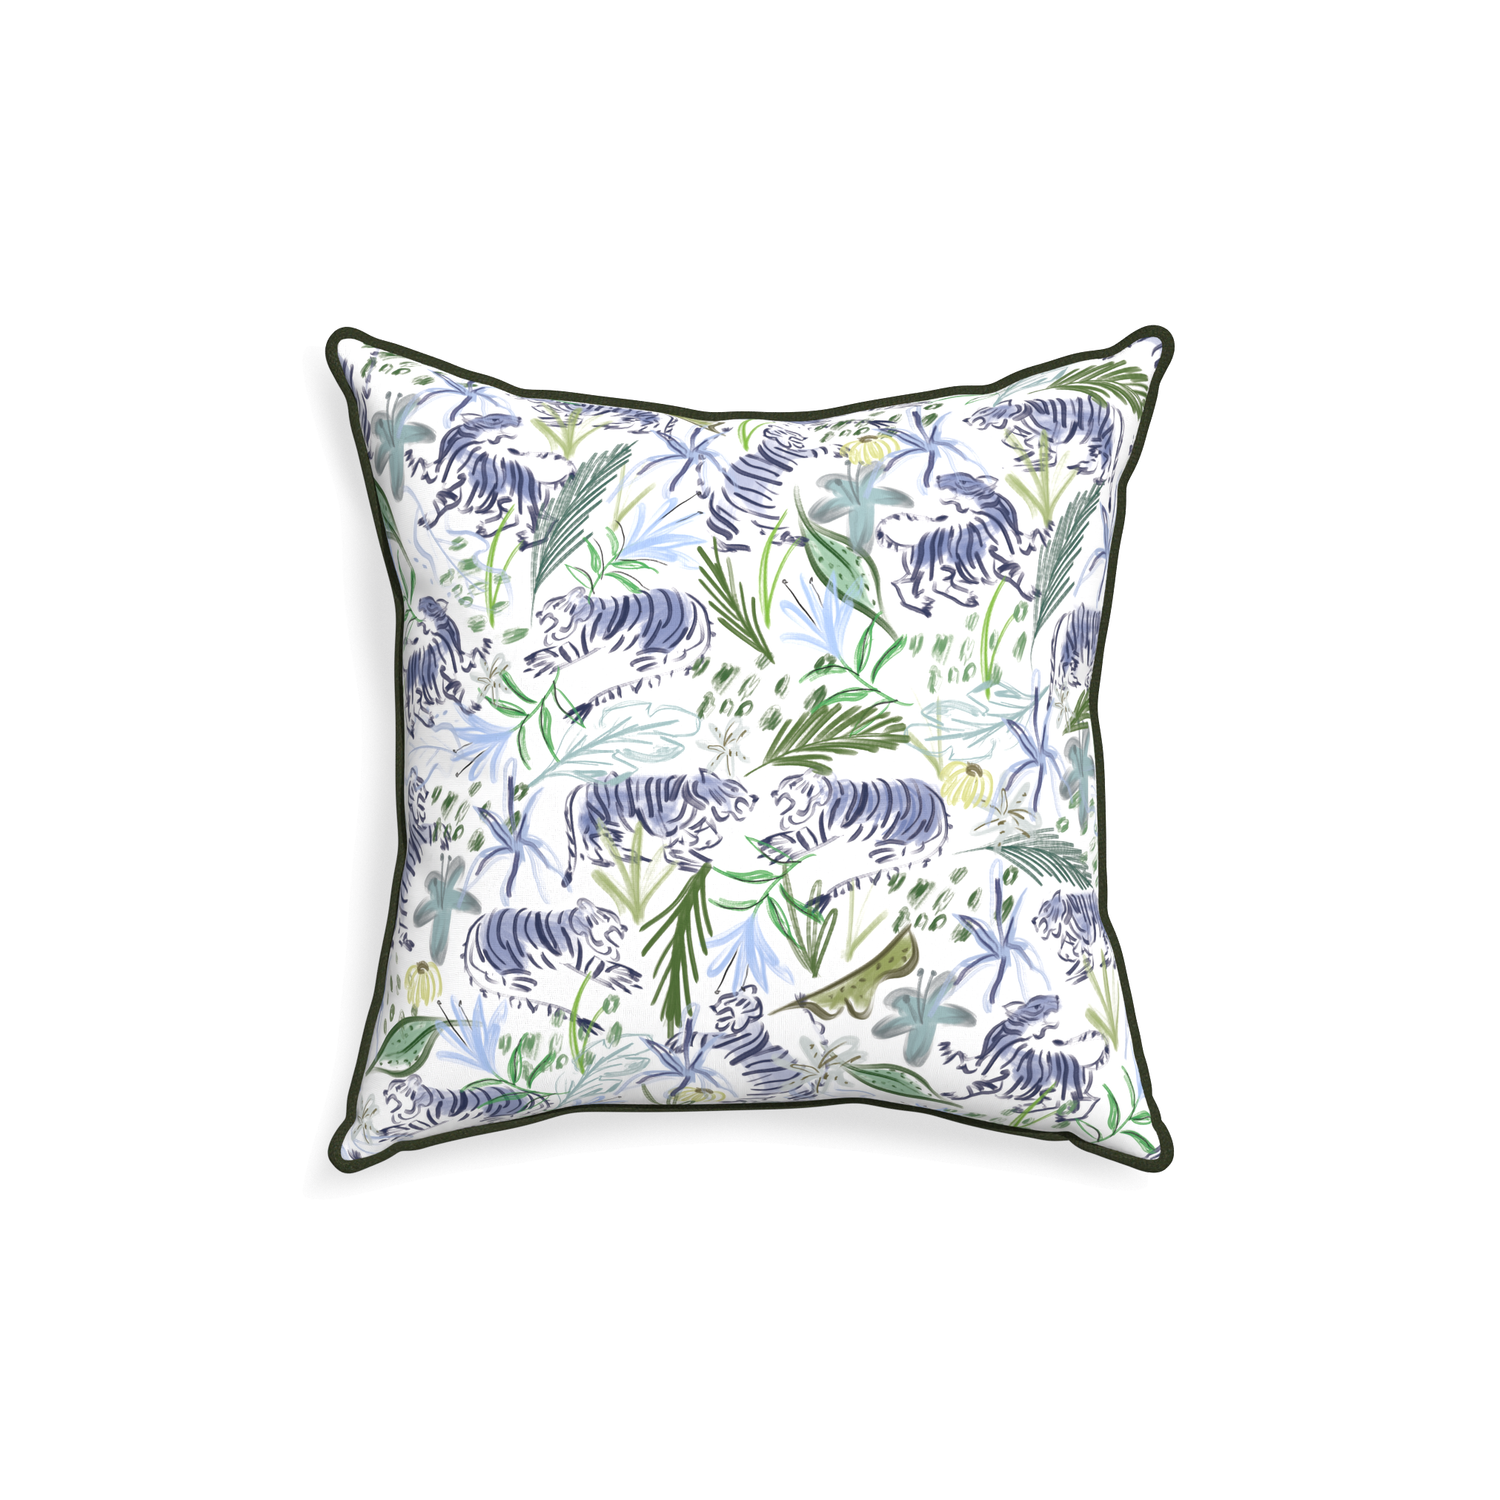 18-square frida green custom green tigerpillow with f piping on white background